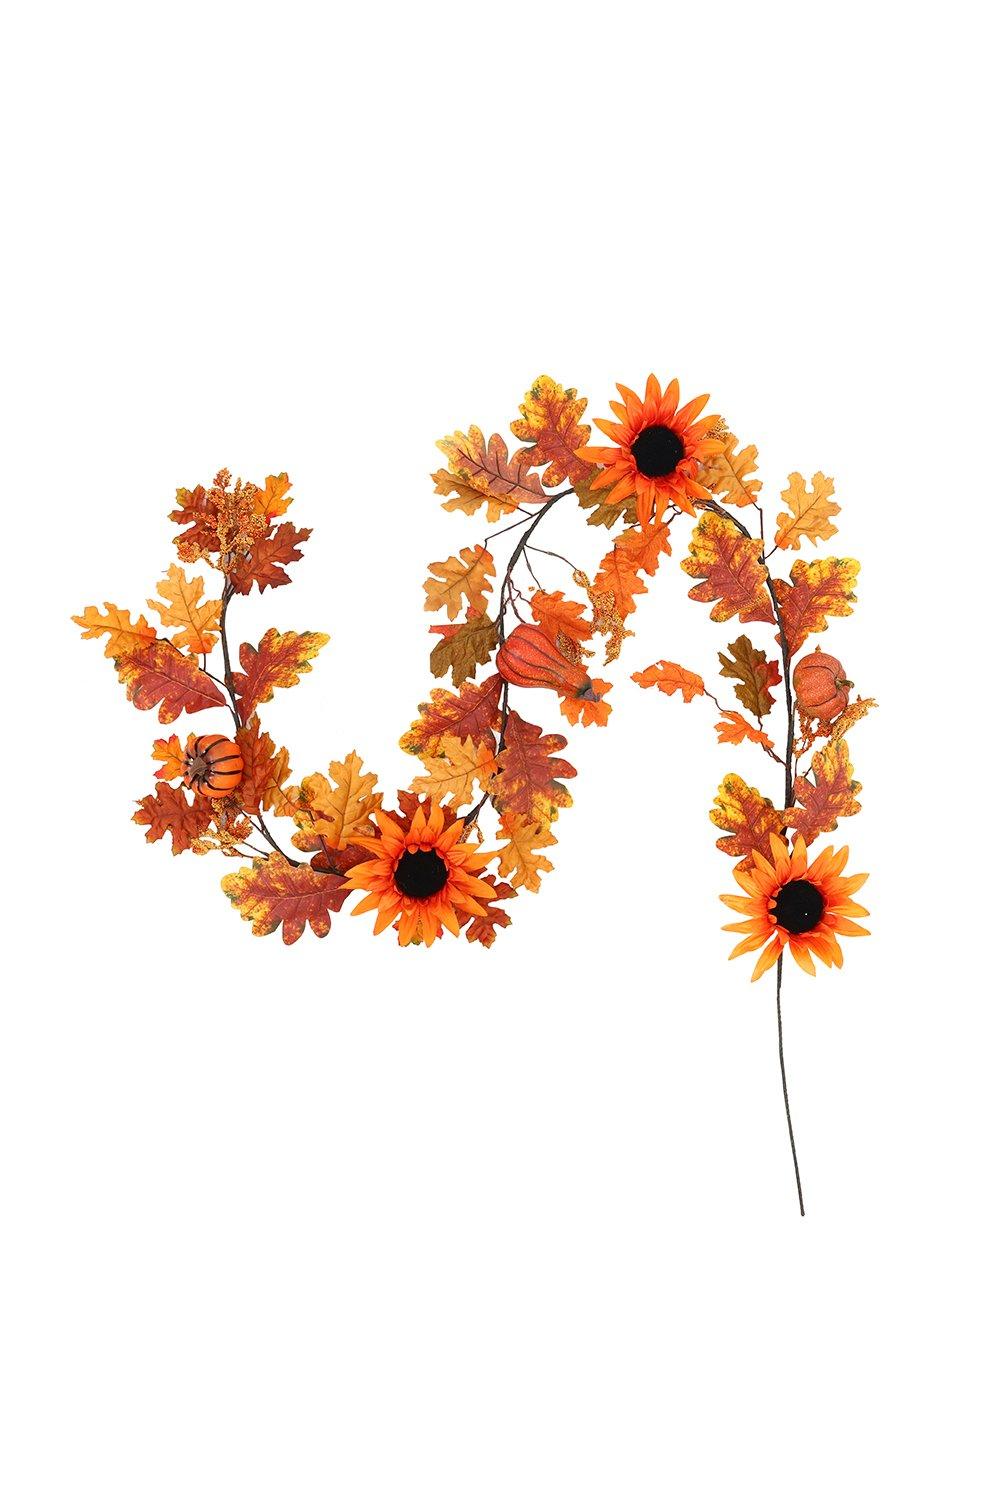 Sunflower Autumn Garland with Lights for Halloween and Thanksgiving Decoration